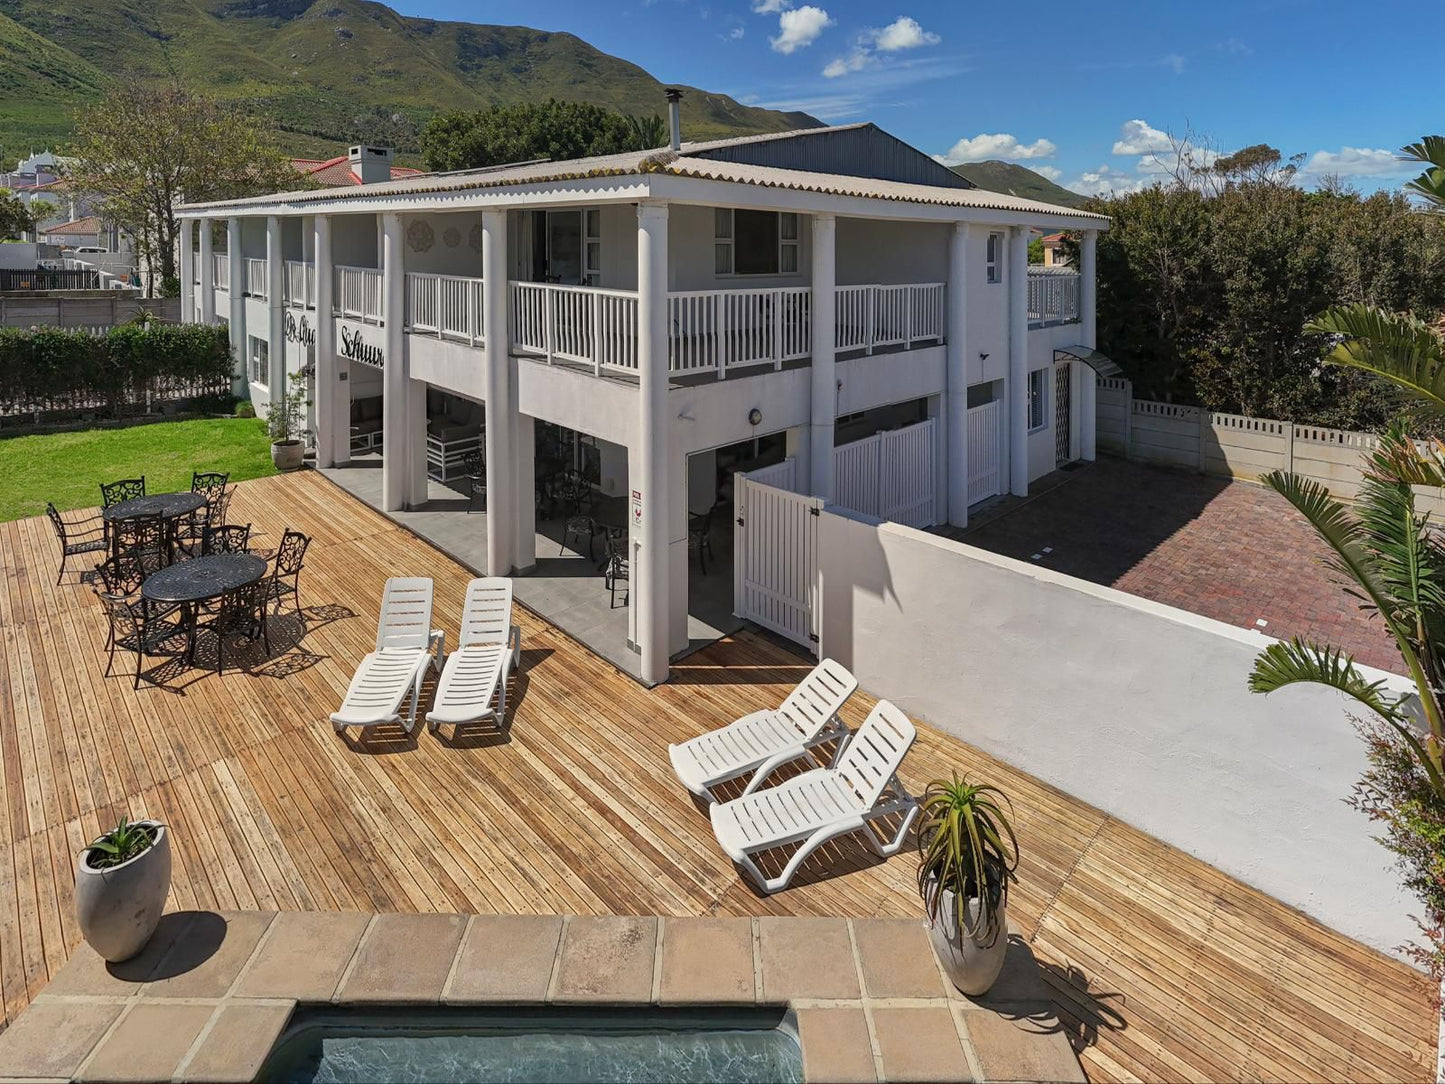 Oude Schuur Boutique Guesthouse Onrus Hermanus Western Cape South Africa Balcony, Architecture, House, Building